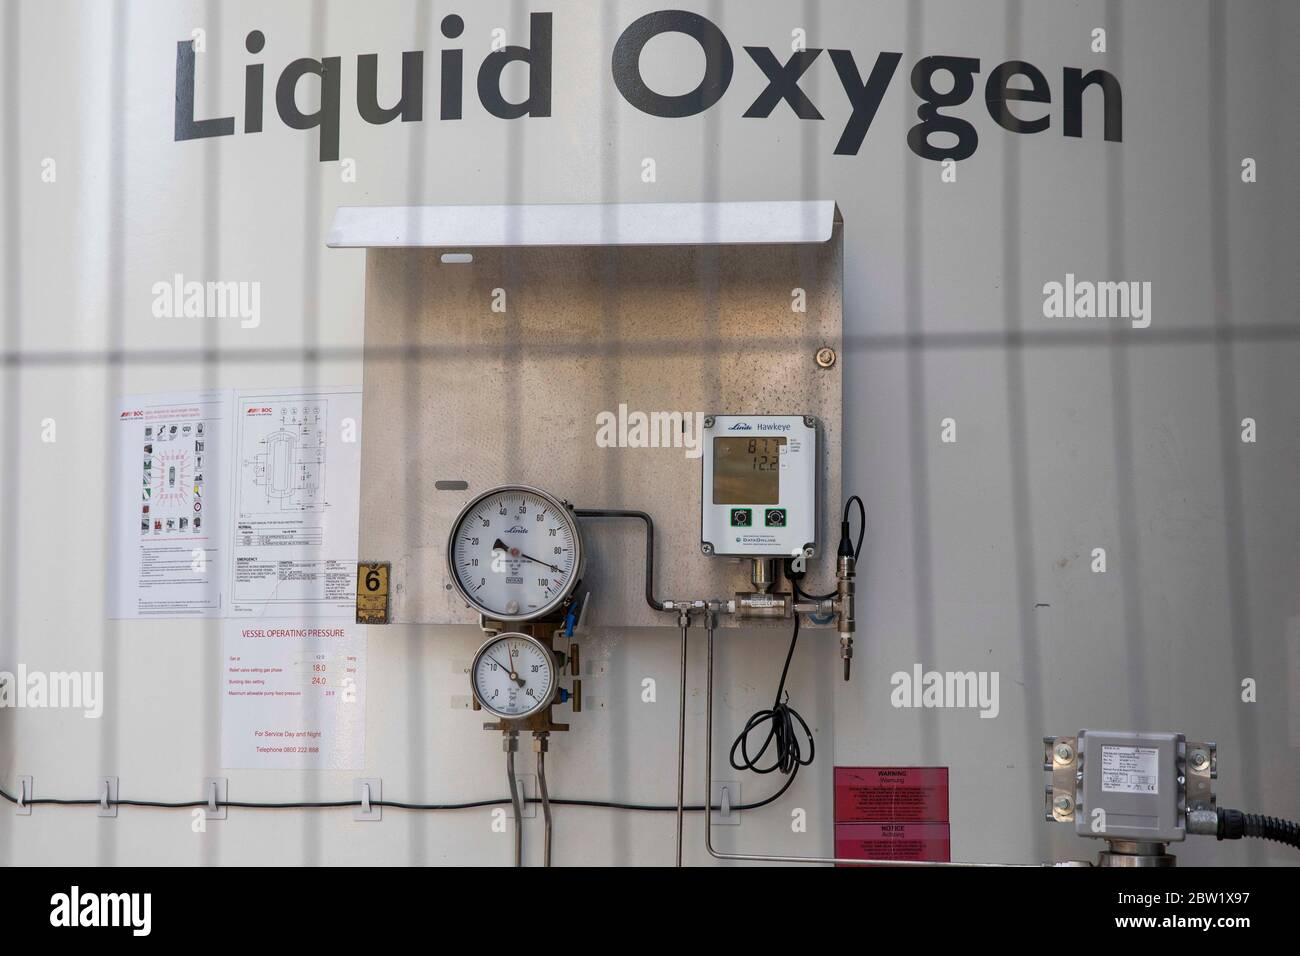 Pressure dials and gauges on a liquid oxygen cylinder at University Hospital of Wales in Cardiff, May 2020. Stock Photo